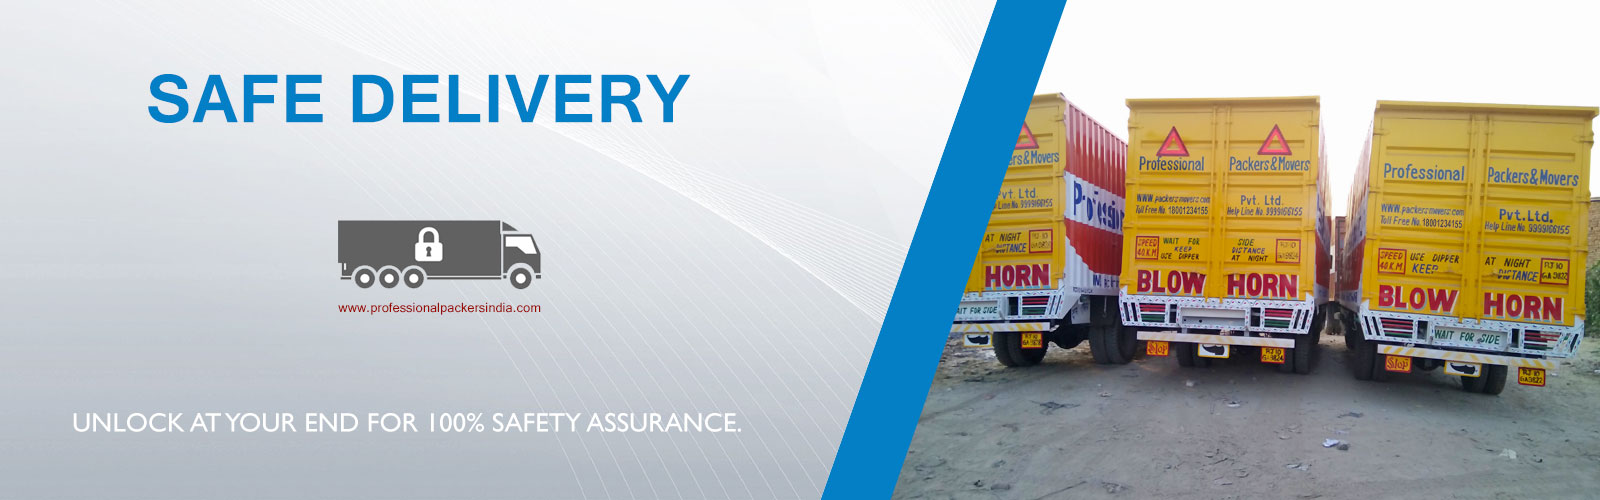 Movers and Packers in Mysore is well known packing & moving business organisation in this ground of loading and unloading, we at Packers Movers Mysore offering any type of packing and moving services all over India and world.